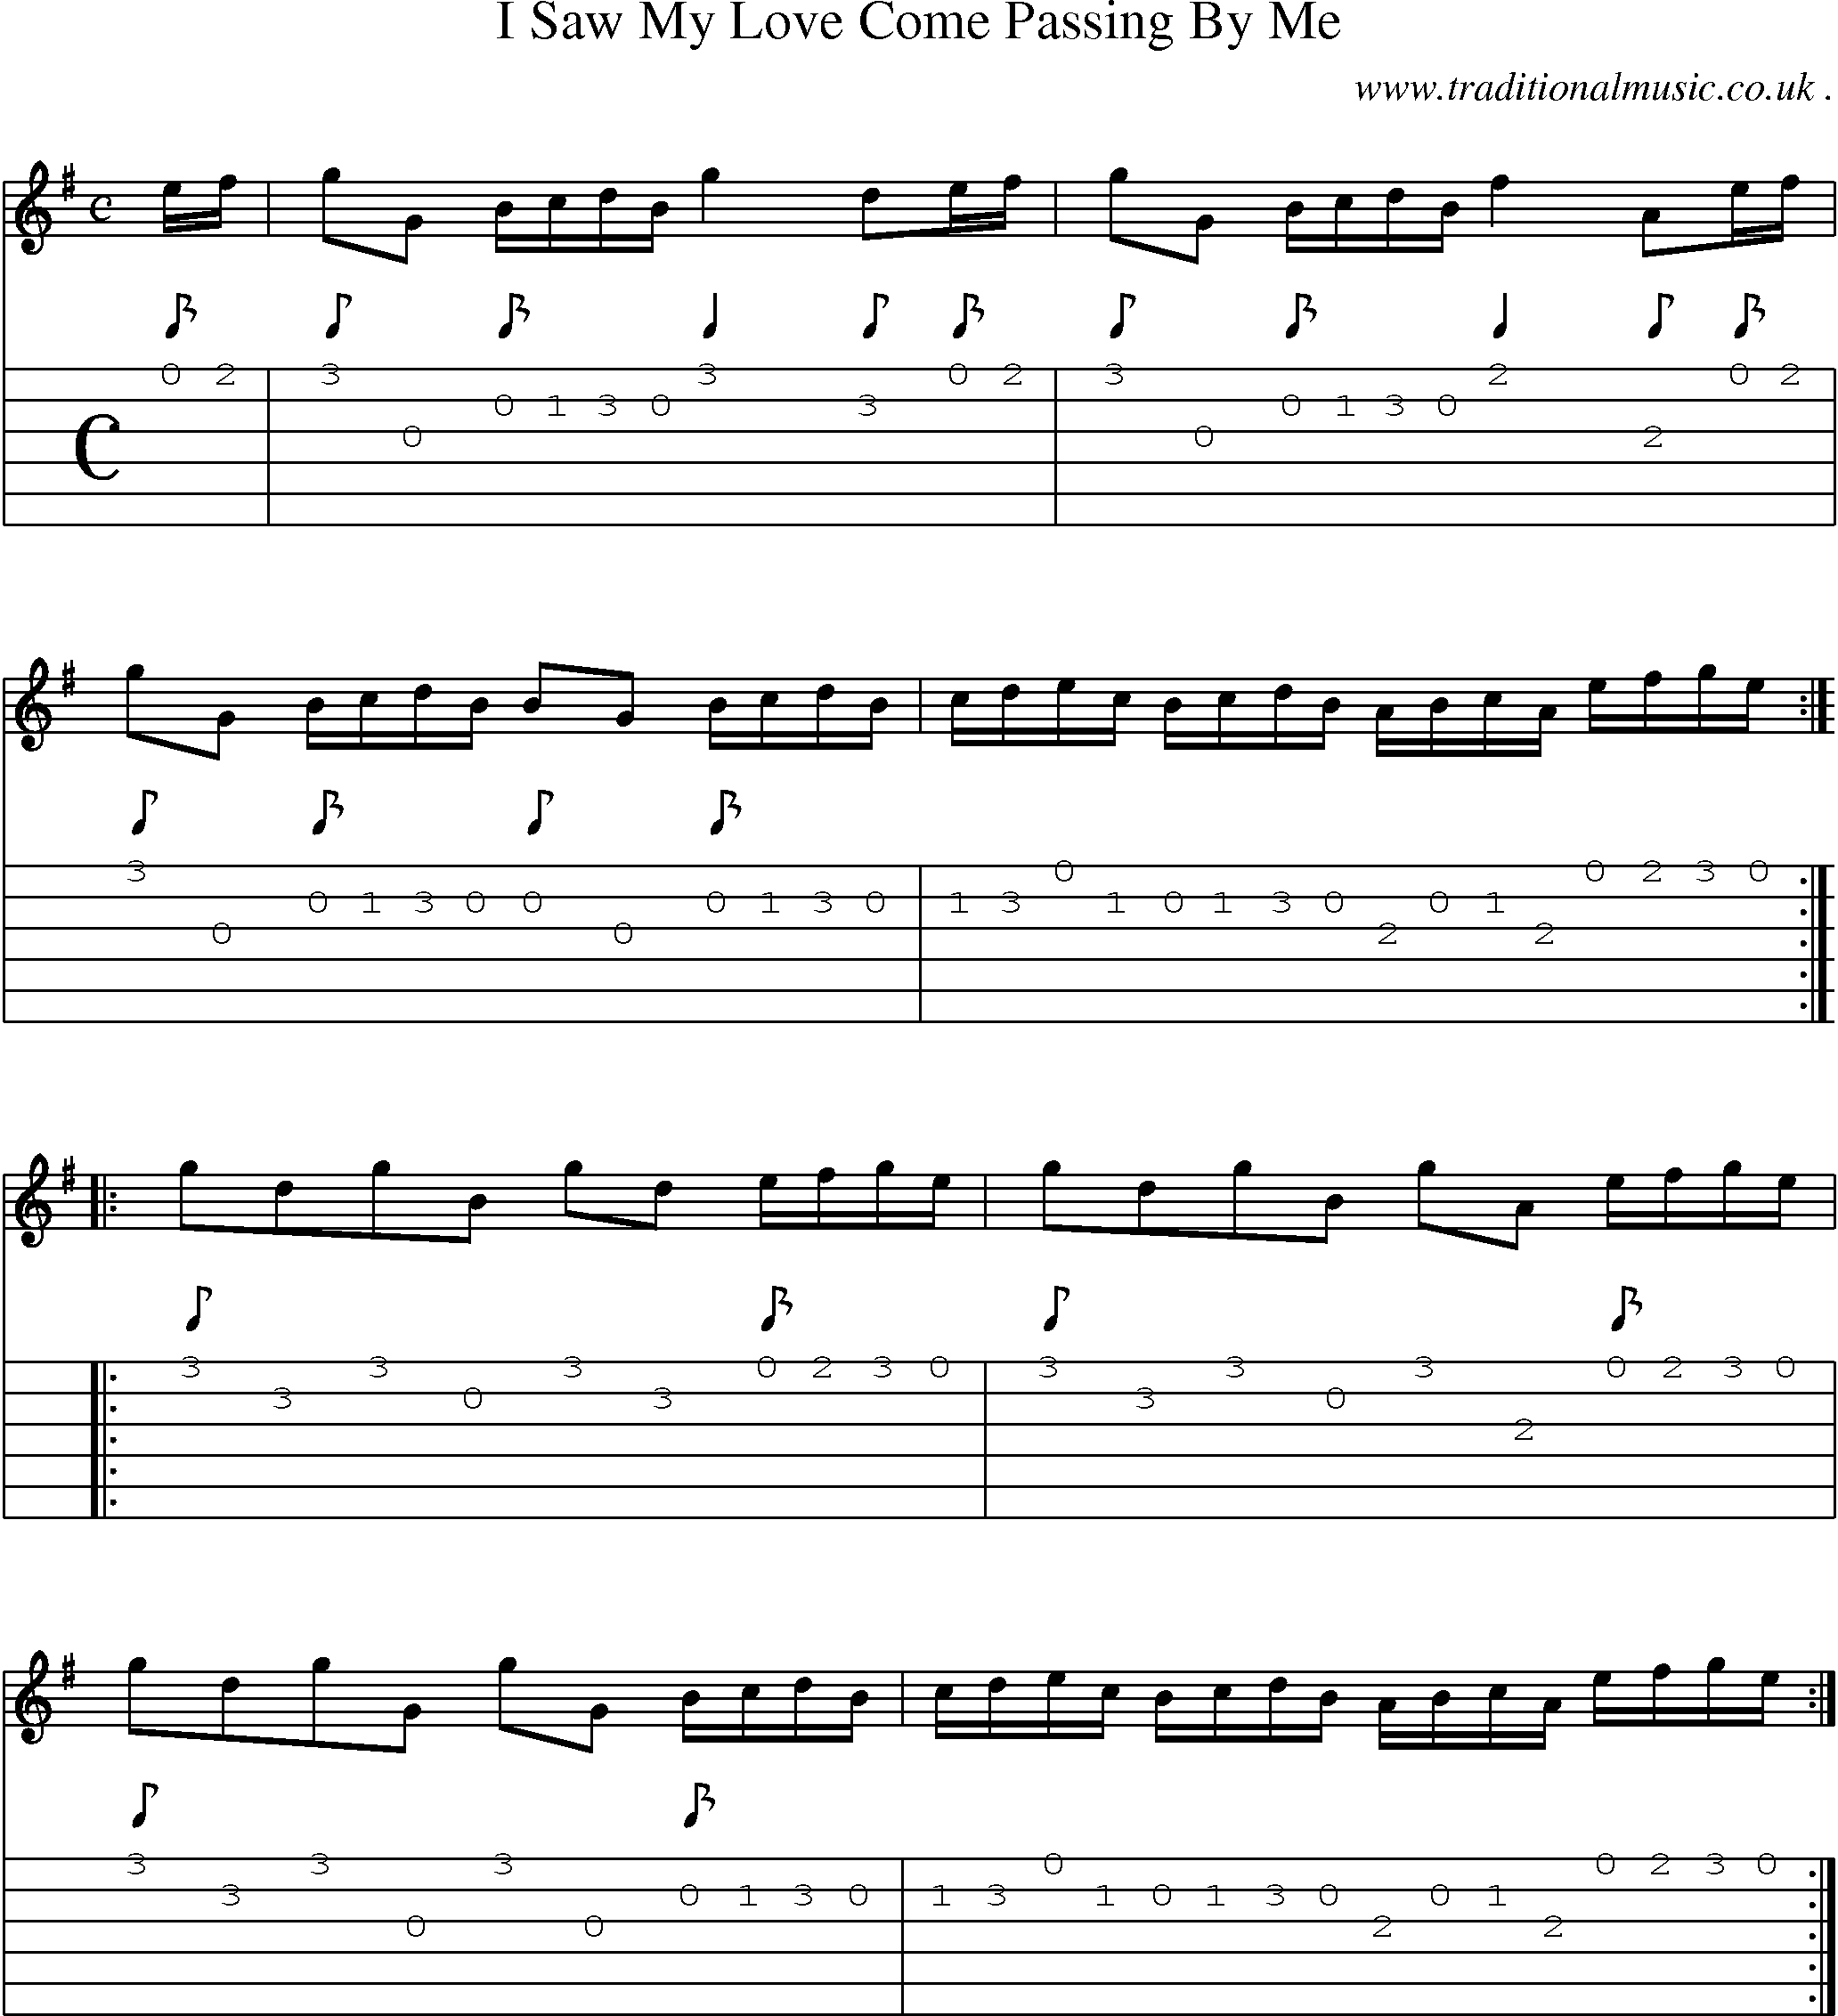 Sheet-Music and Guitar Tabs for I Saw My Love Come Passing By Me